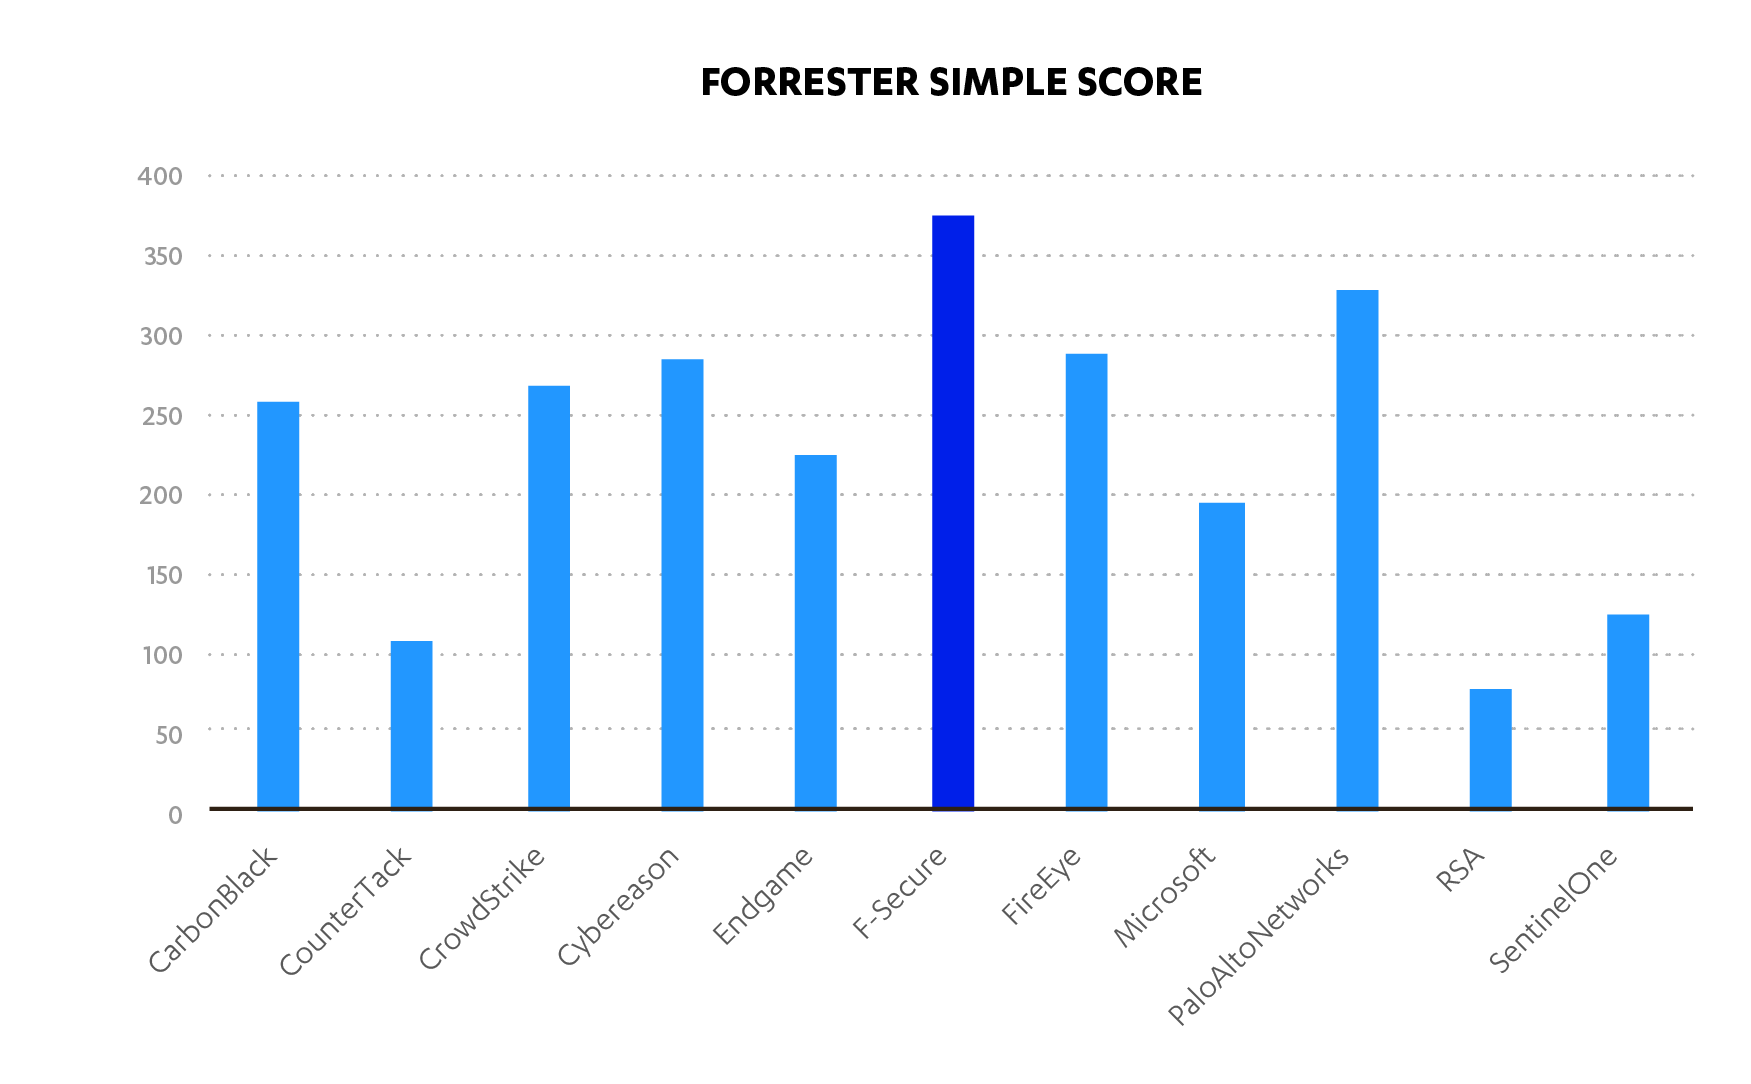 Forrester Simple Score